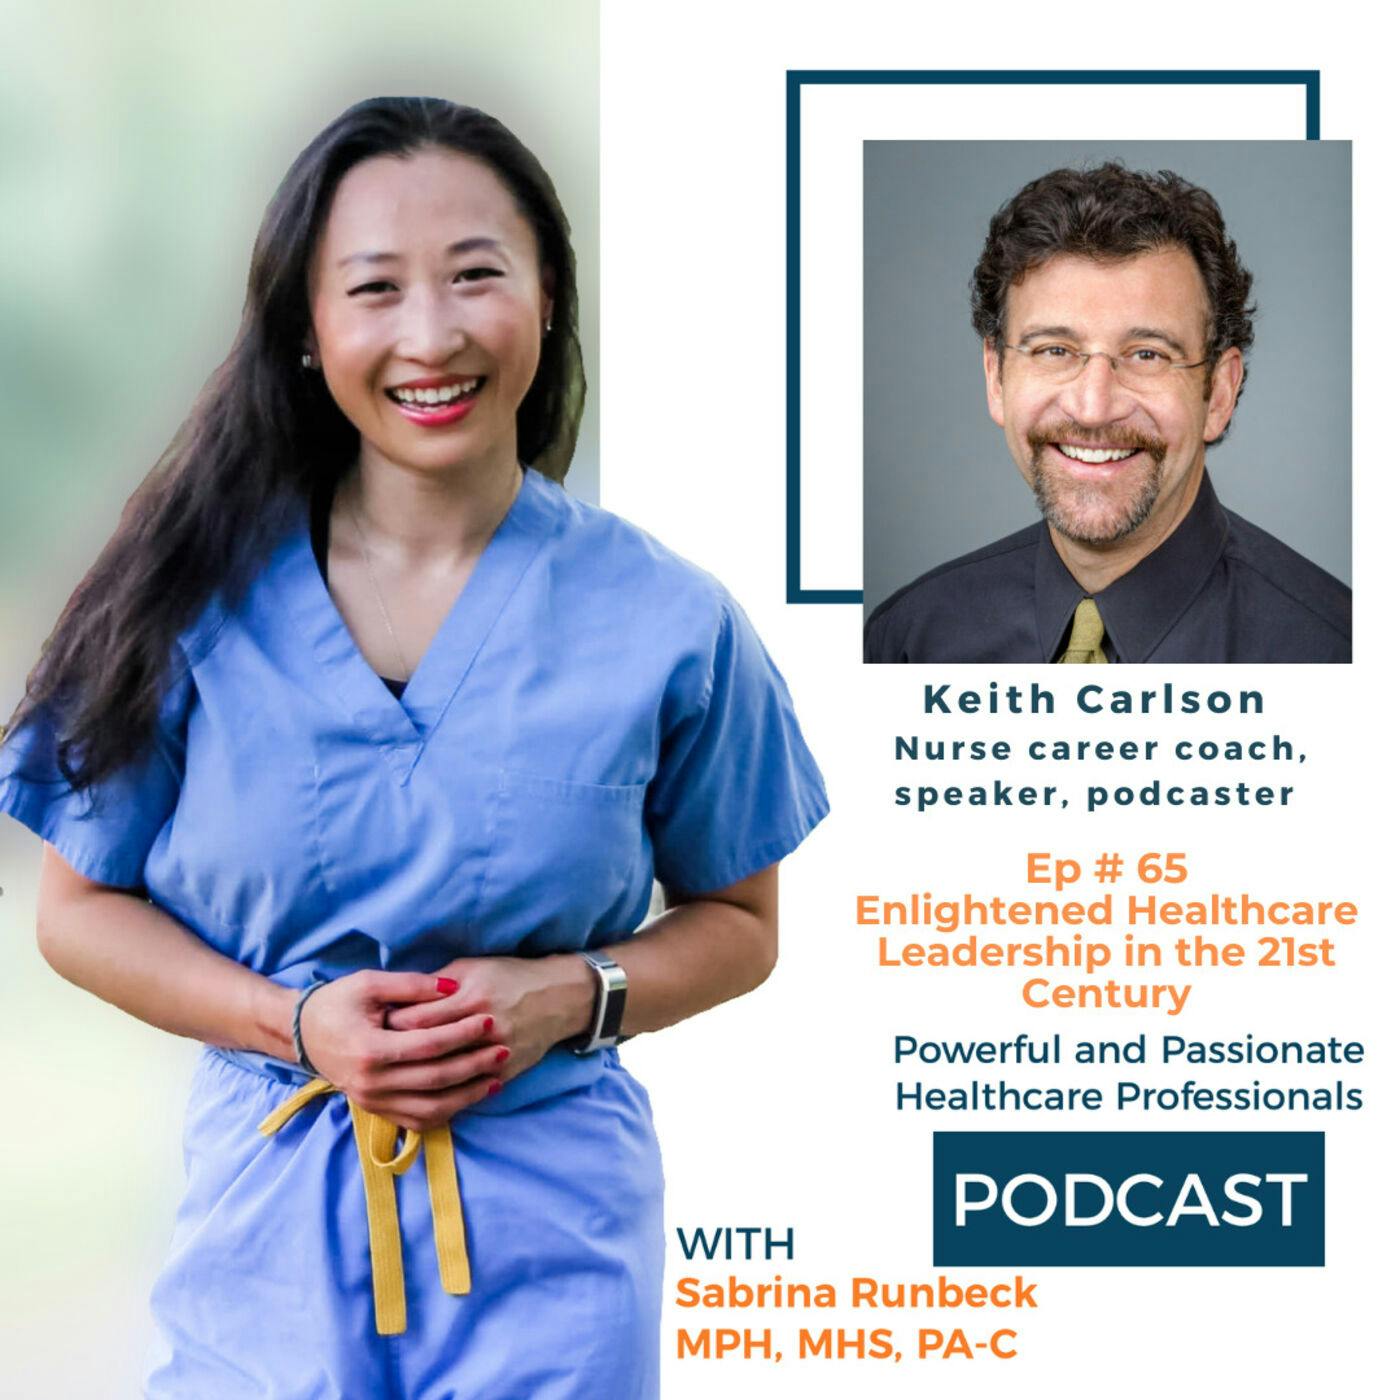 Ep 65 – Enlightened Healthcare Leadership in the 21st Century with Keith Carlson